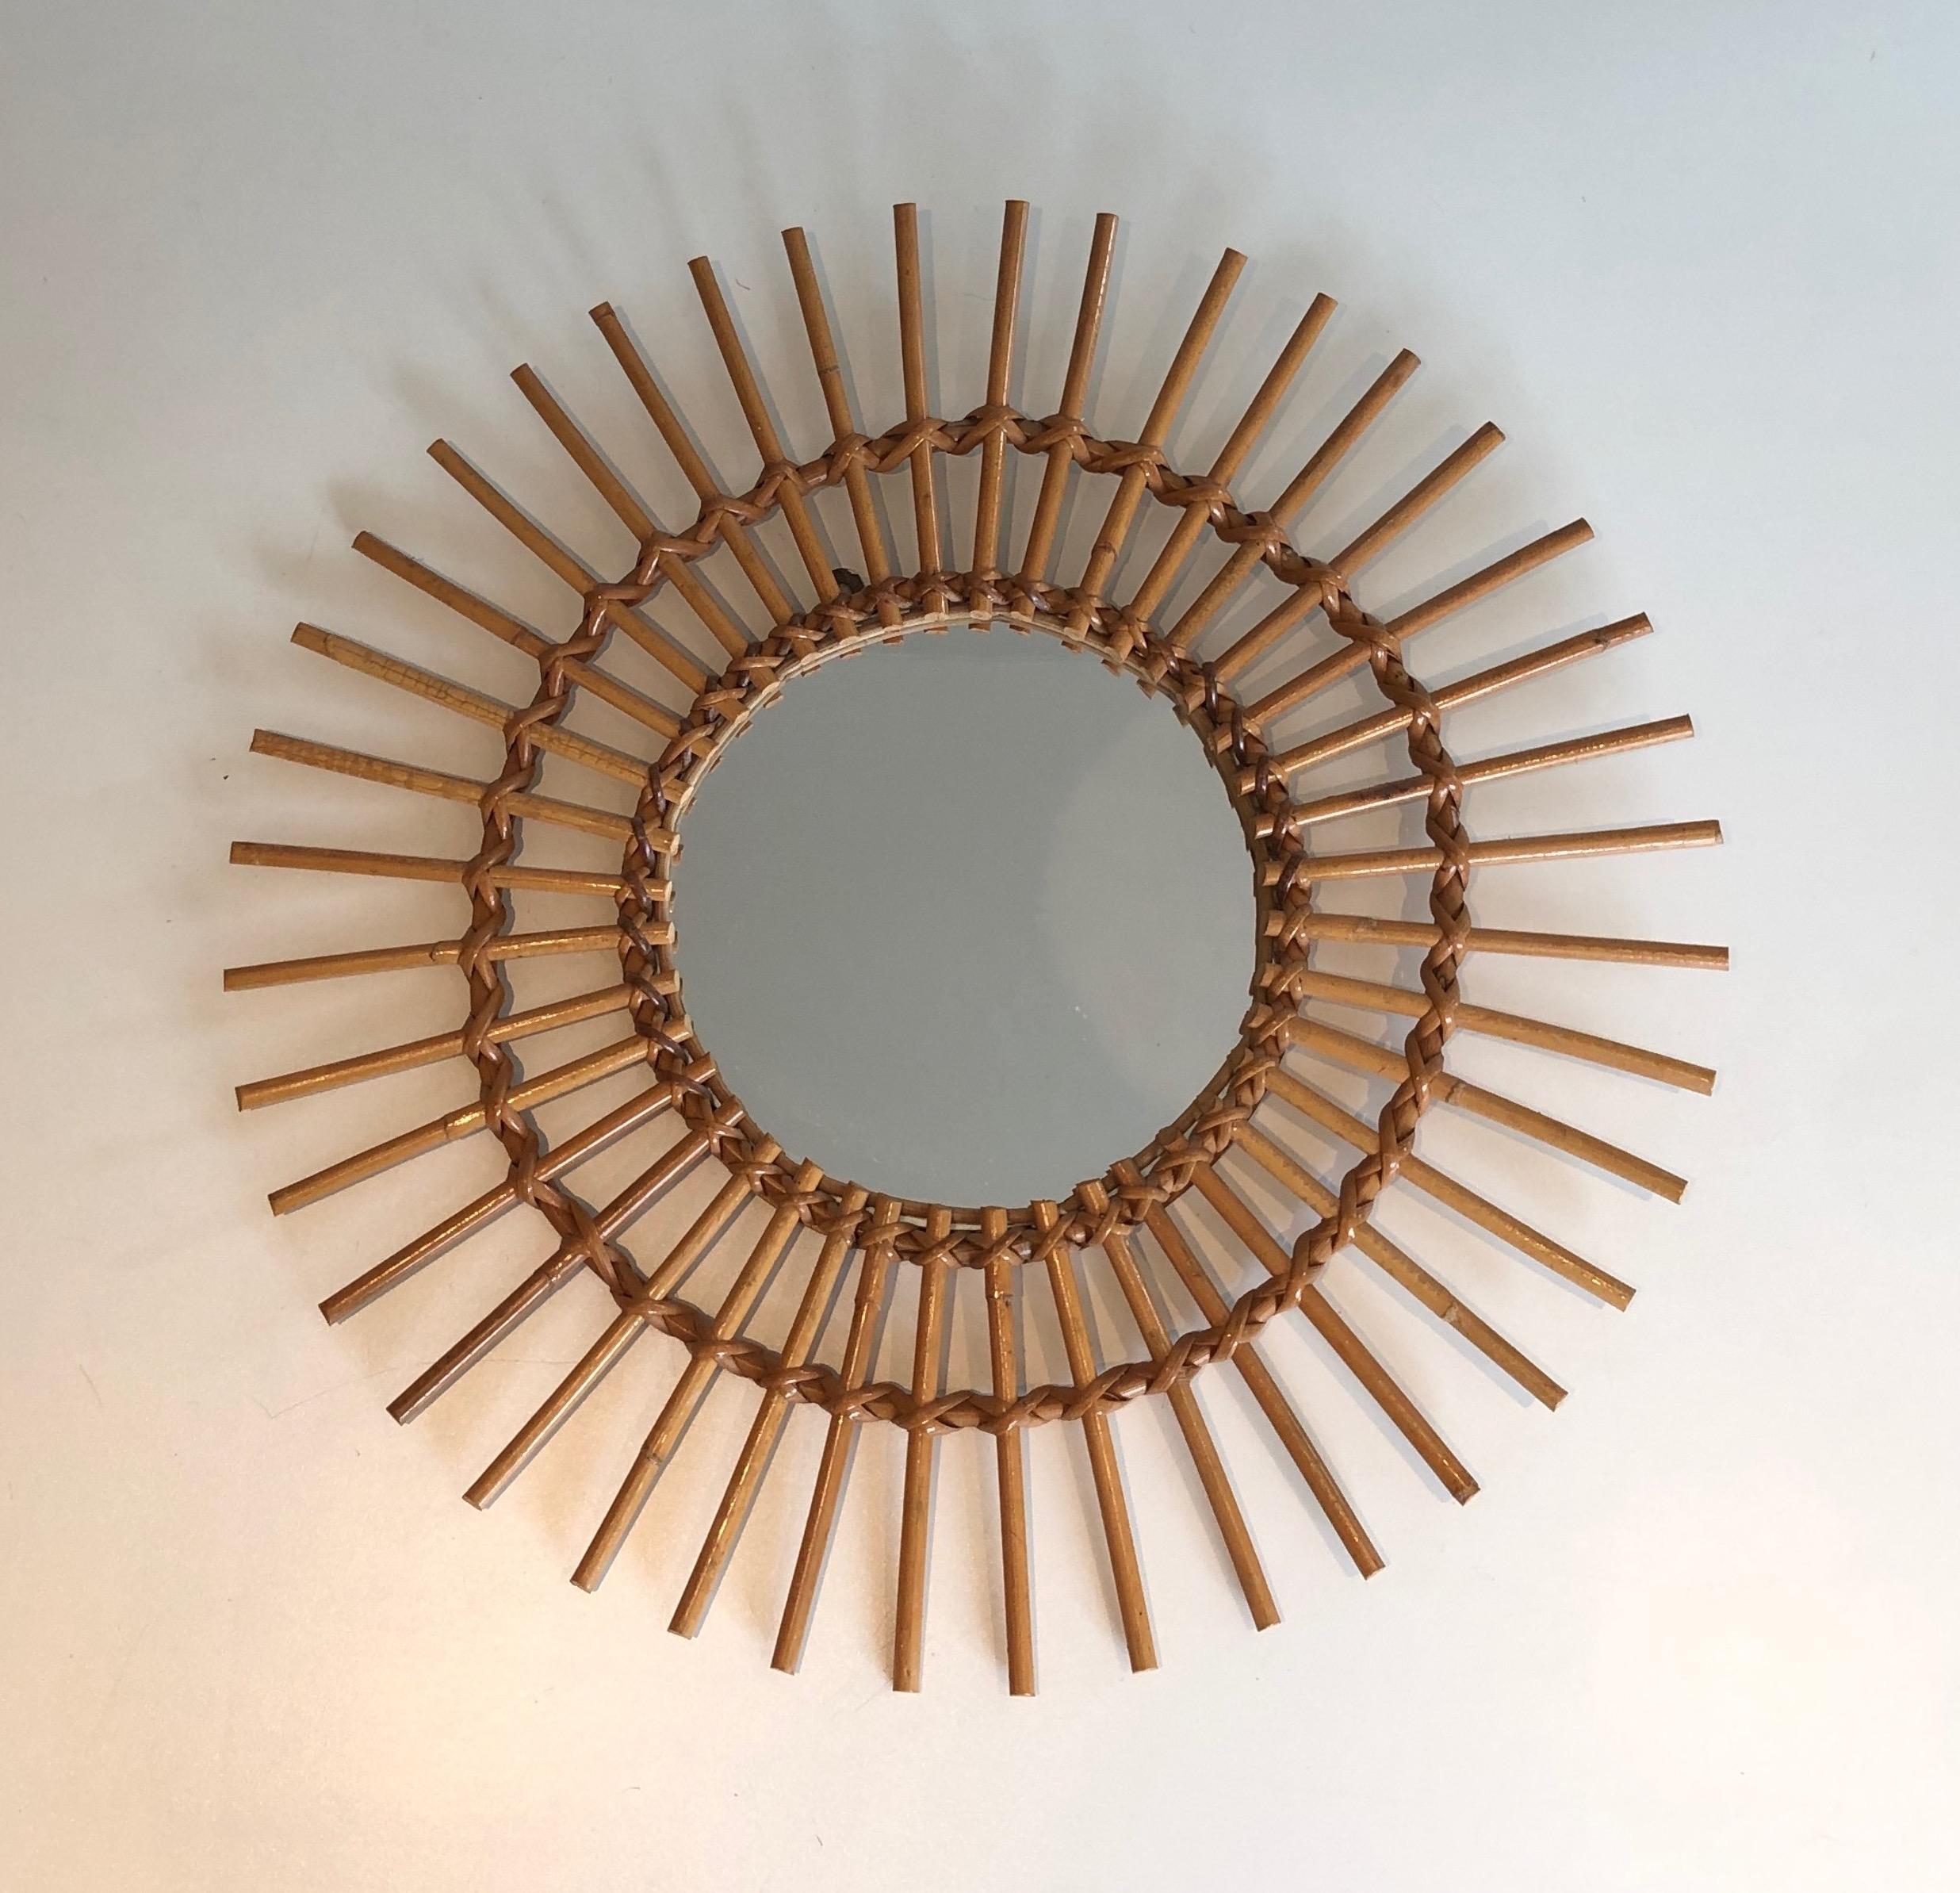 This round mirror is made of rattan, This is a French work, circa 1970.